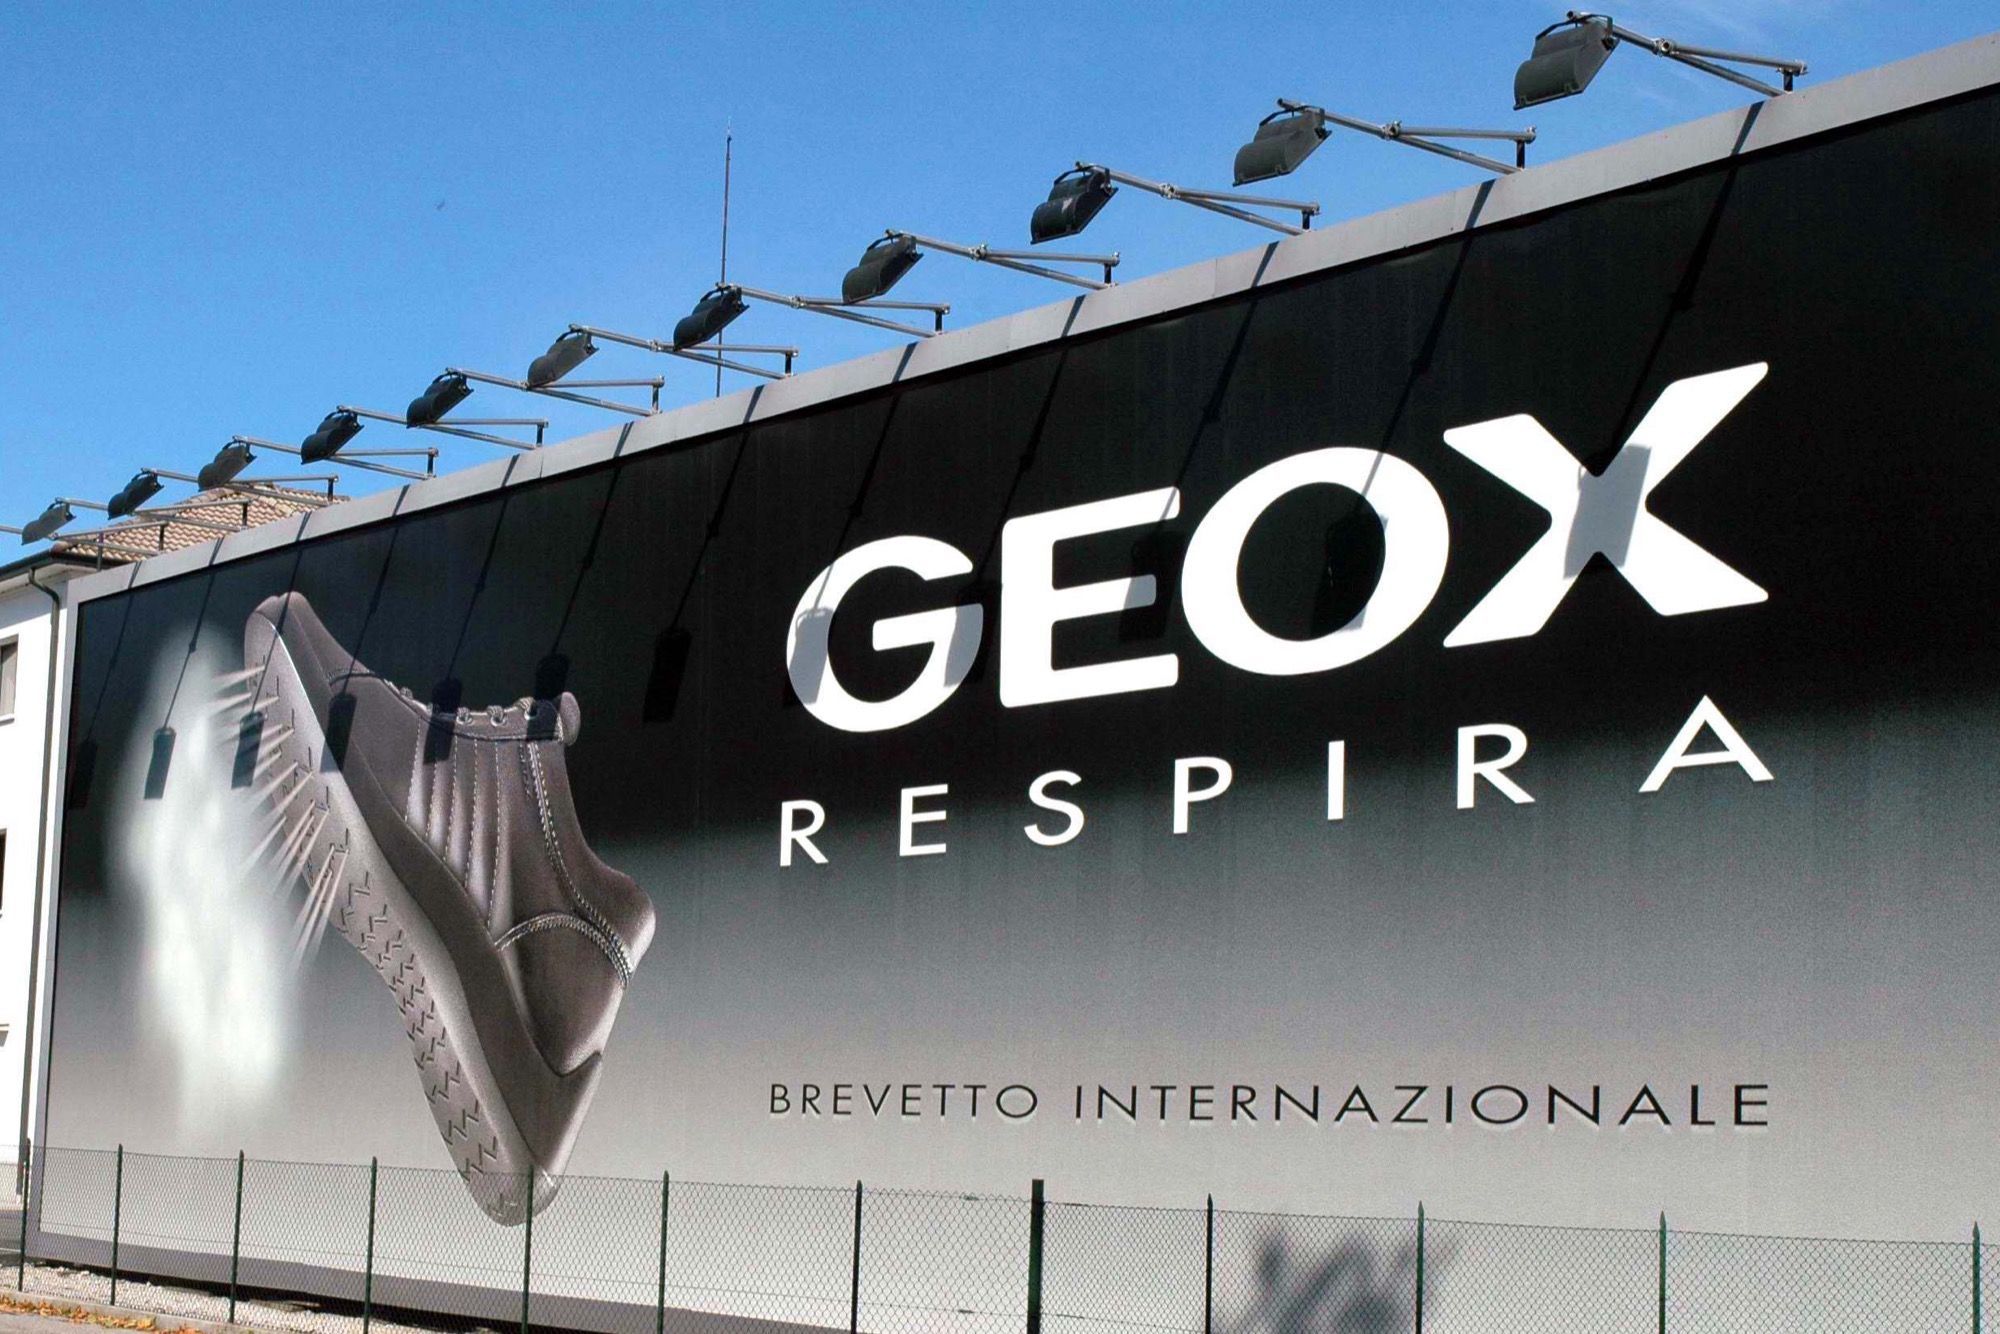 wenselijk Kritisch Liever What happened to Geox, the brand of "the shoe that breathes"